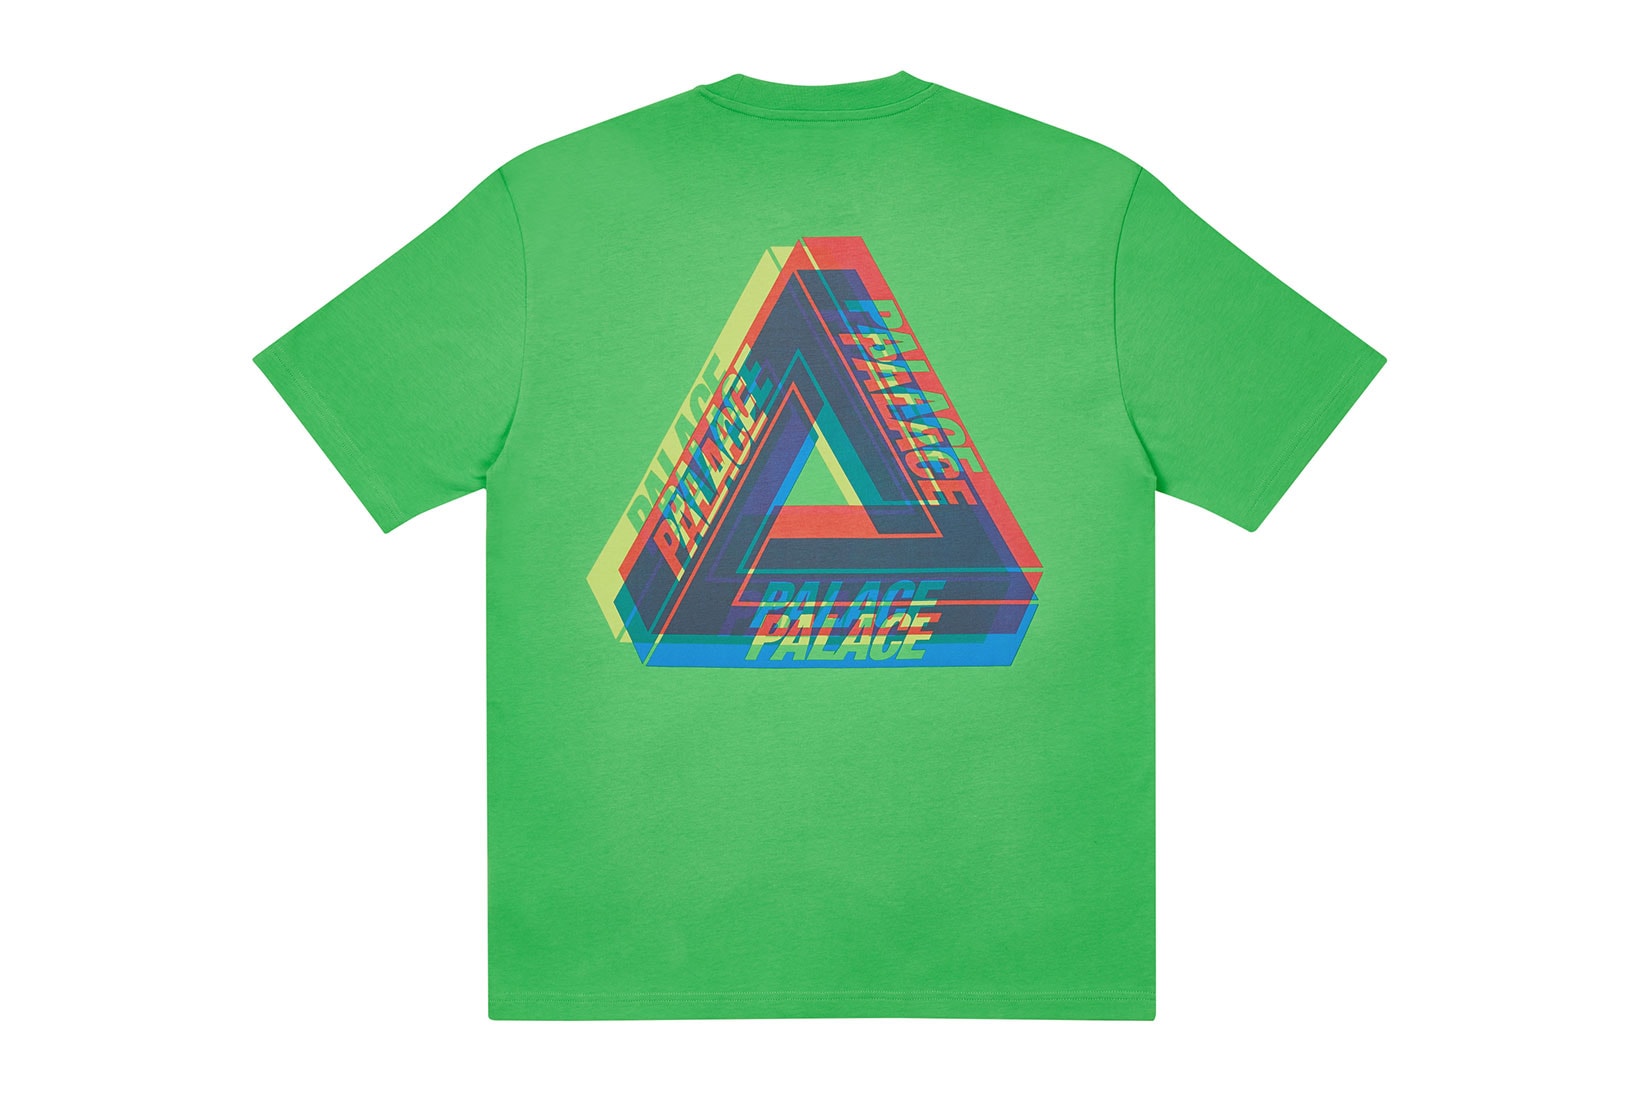 palace skateboards holiday drop 5 green t-shirts tees release when to buy